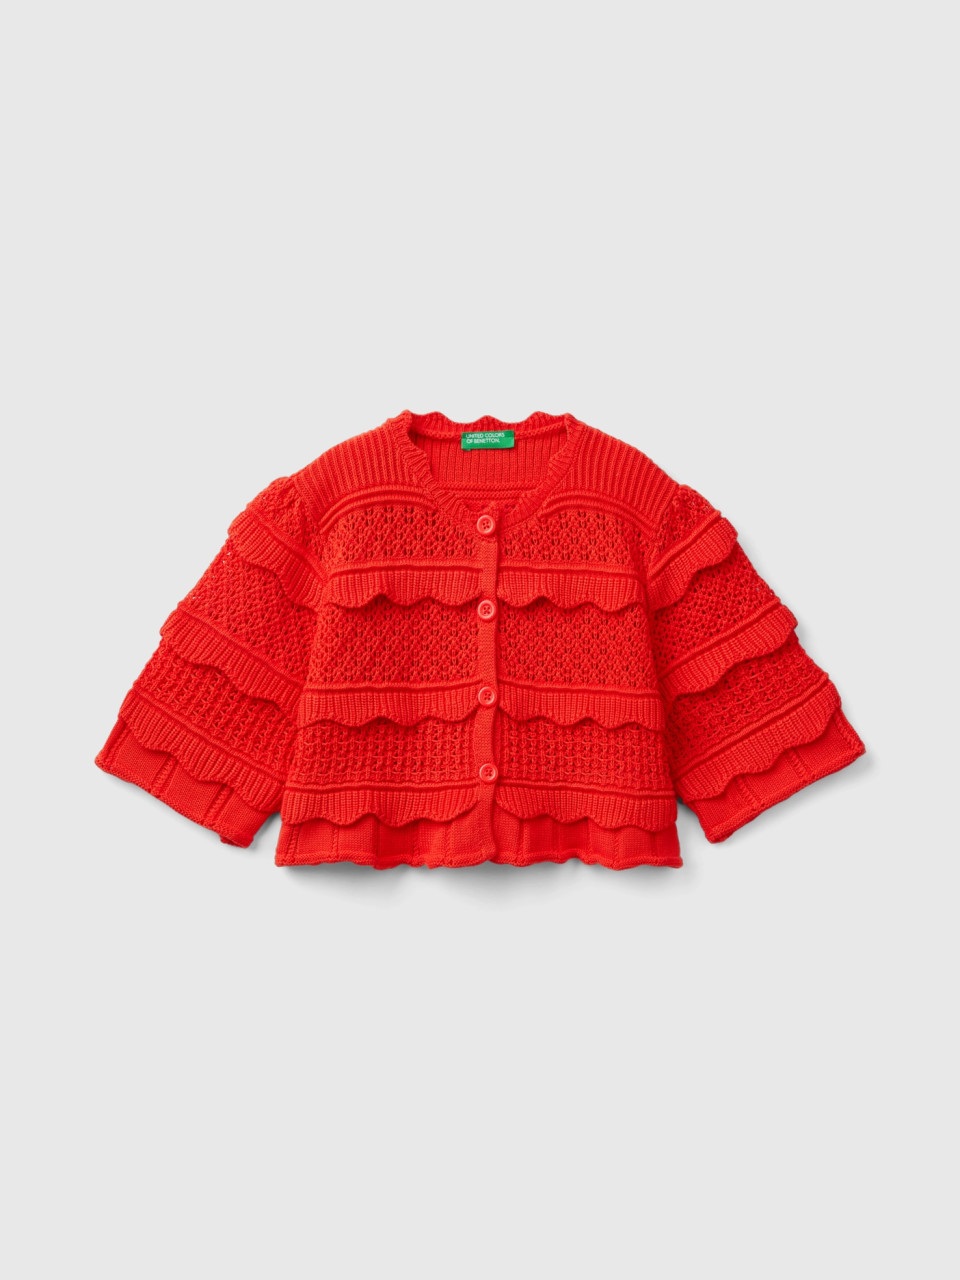 Benetton, Knit Cardigan With Buttons, Red, Kids